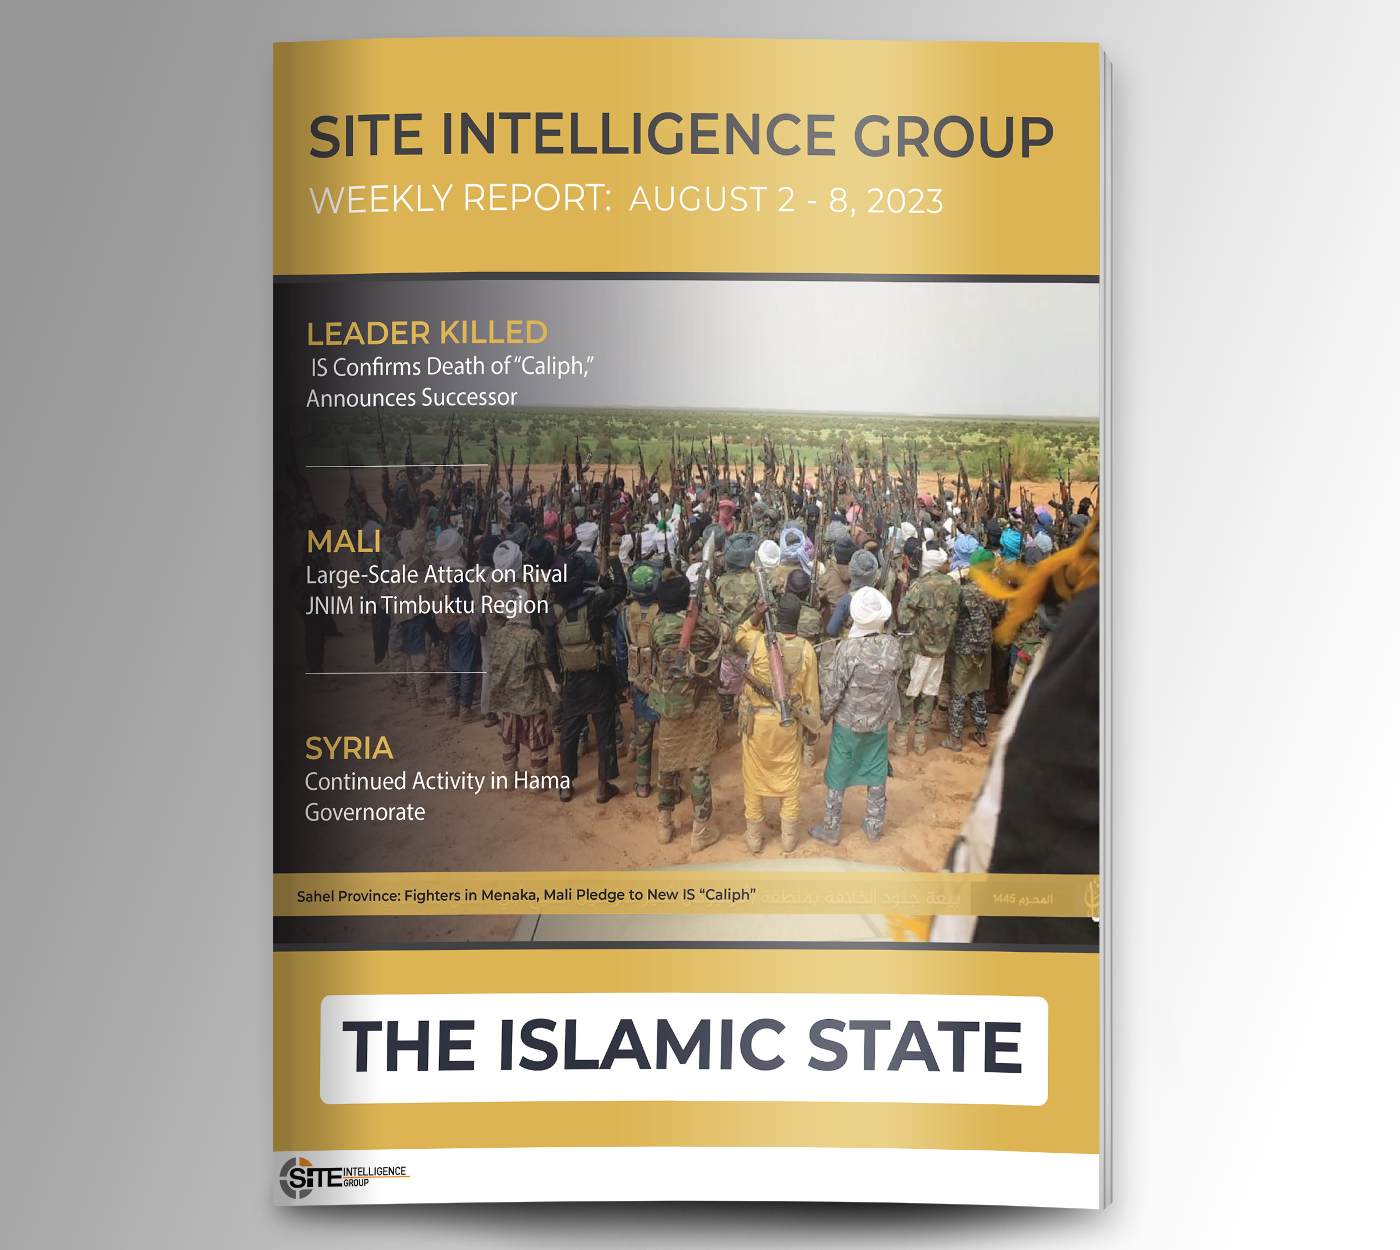 Weekly inSITE on the Islamic State for August 2-8, 2023